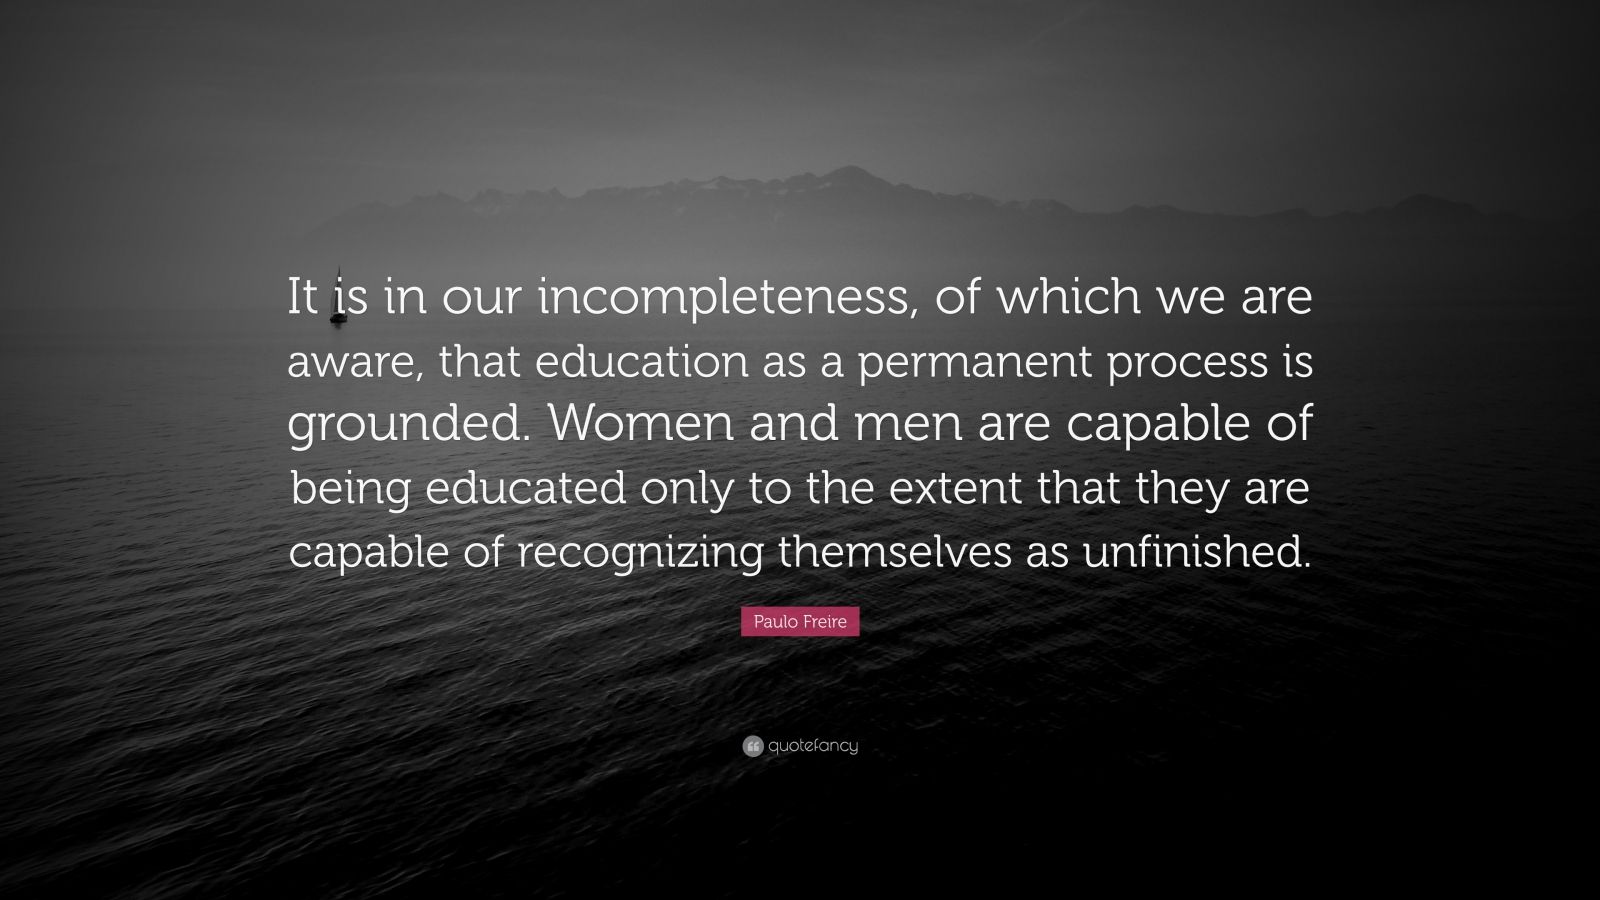 Paulo Freire Quote: “It is in our incompleteness, of which we are aware